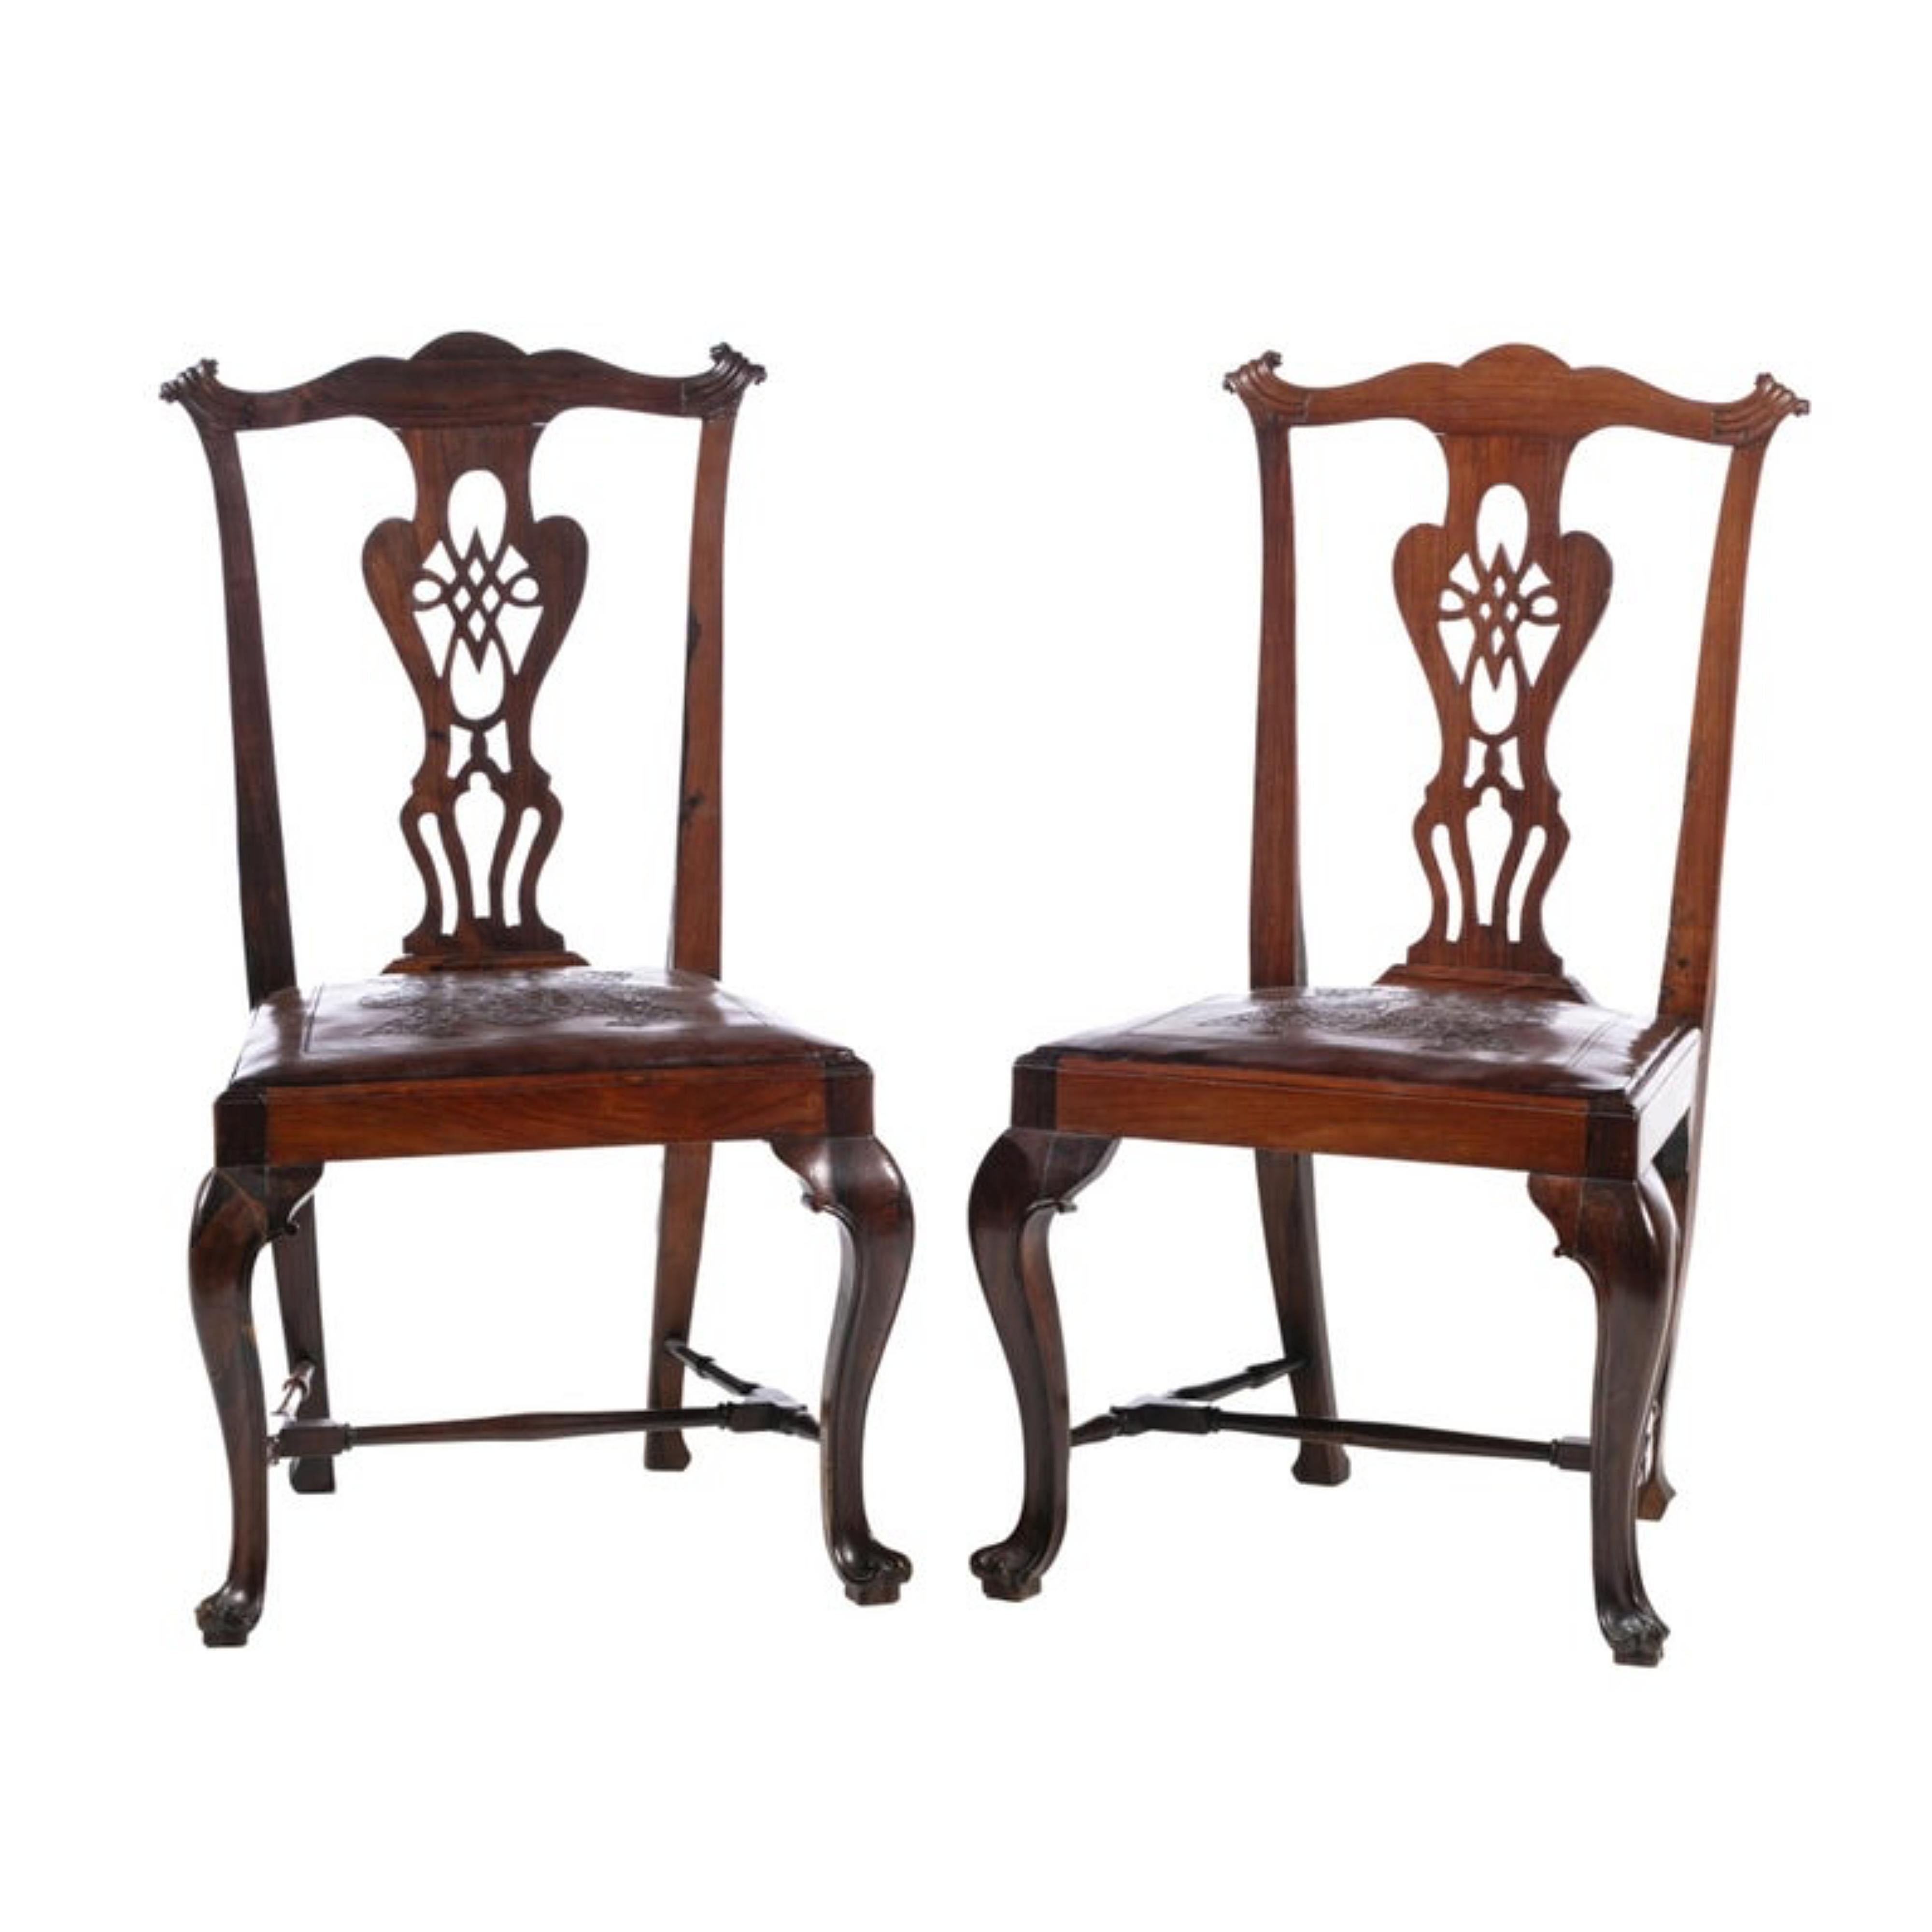 PAIR OF PORTUGUESE CHAIRS 18th Century

rosewood wood, carved.
Backrests decorated with 